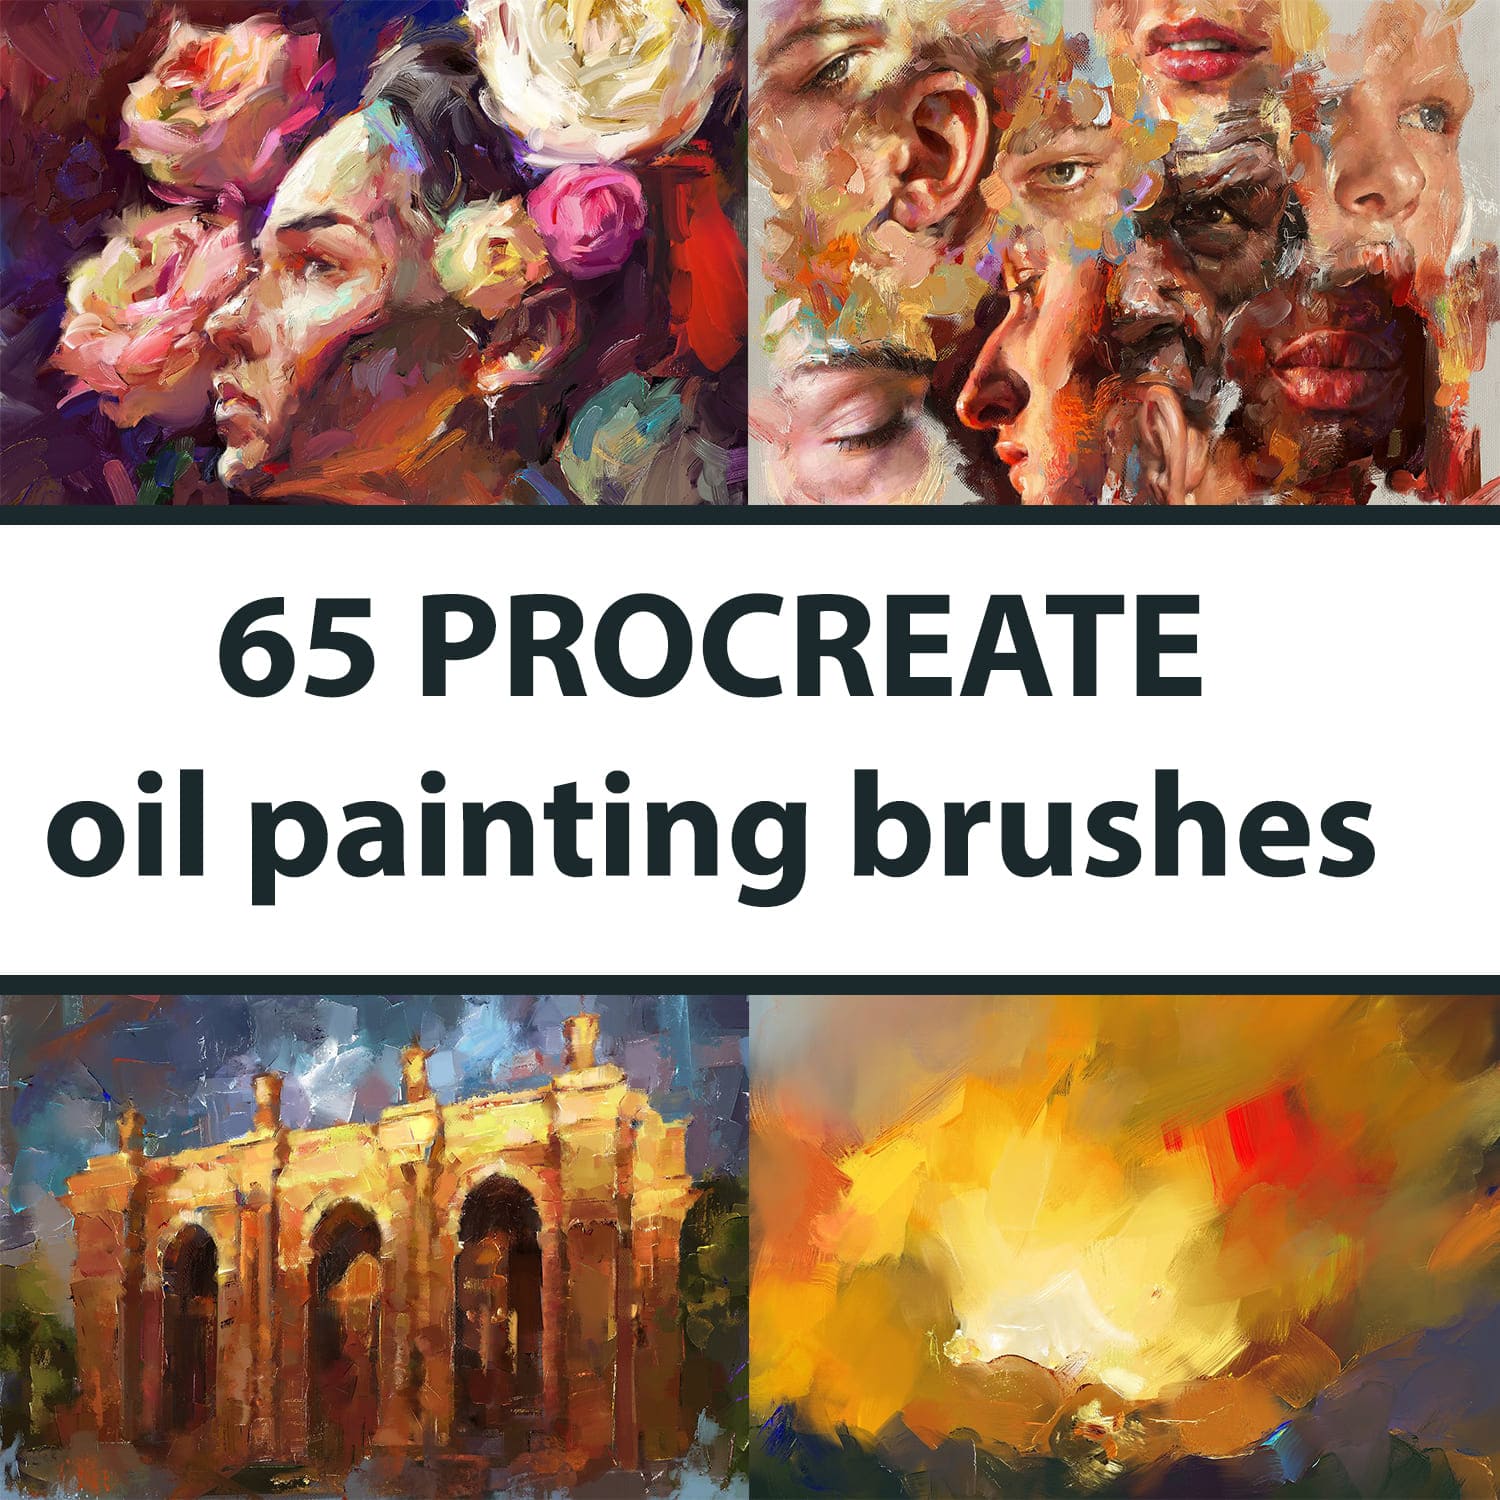 65 Procreate Oil Painting Brushes.